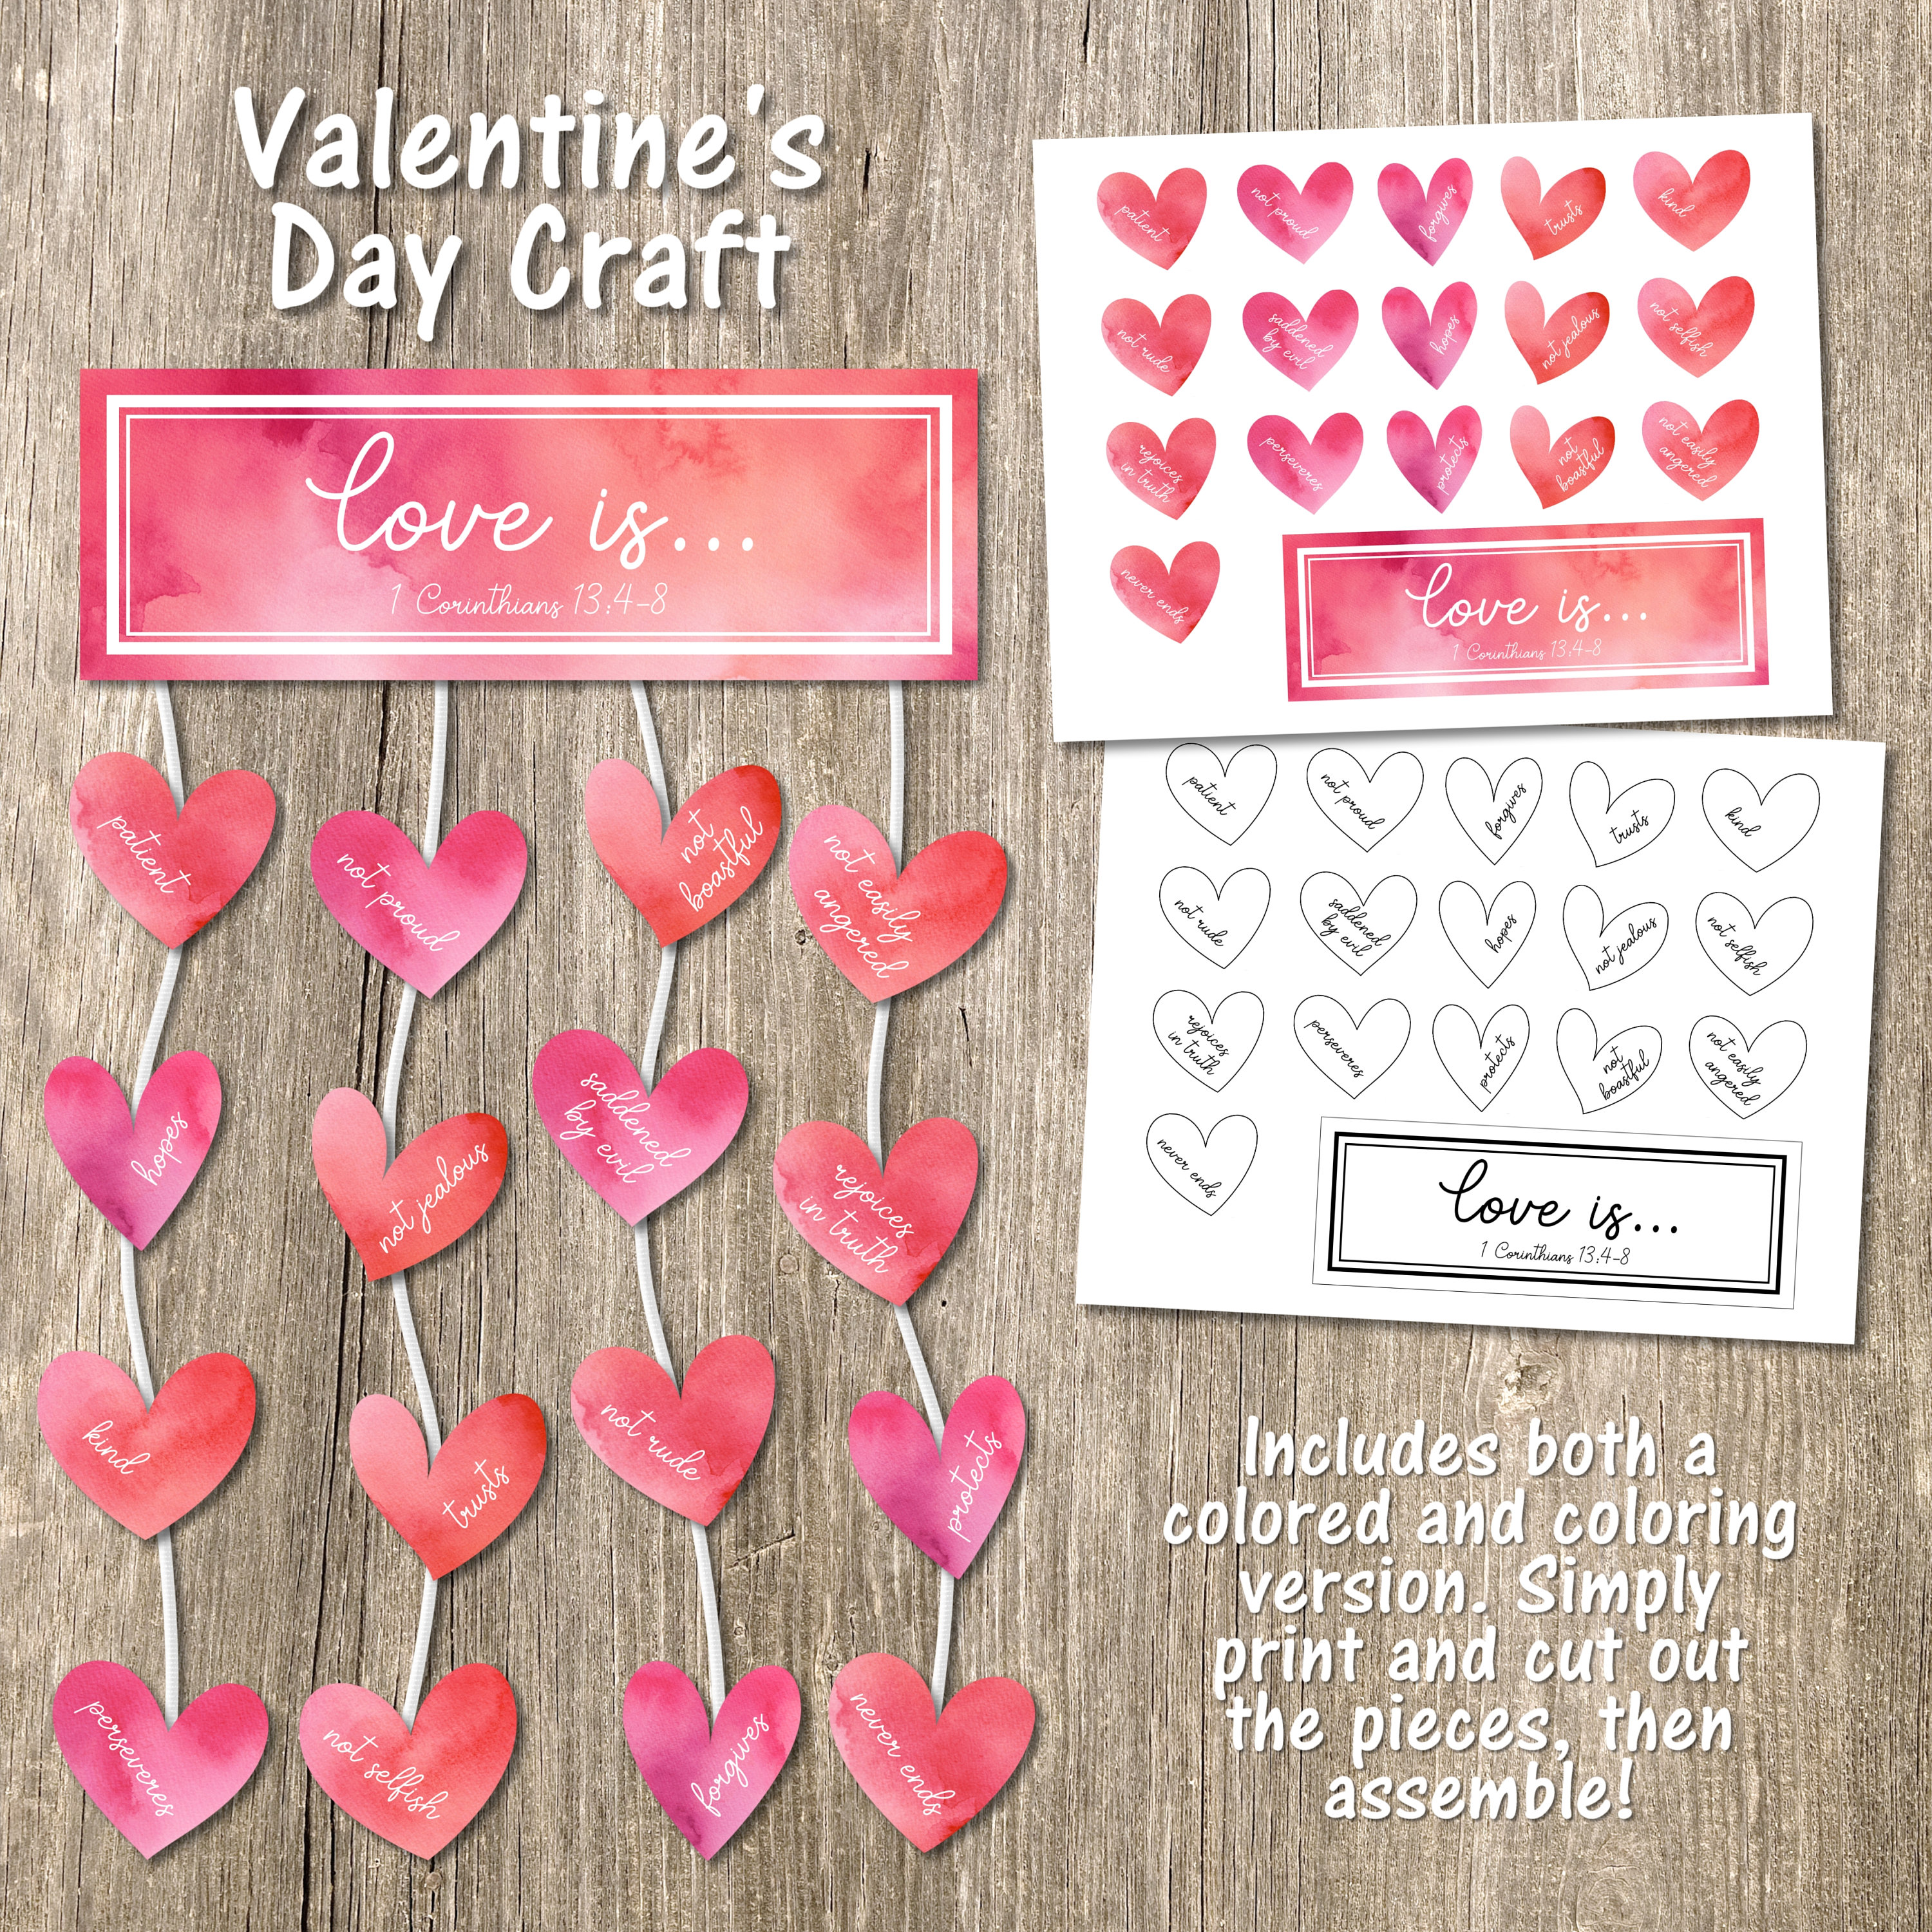 Valentines Day Crafts for Kids - 361pcs DIY Valentines Heart Craft Set for School Gift, 108 Hearts, 50 Googly Eyes, 60 Pom Poms, 36 Wooden Beads, CR